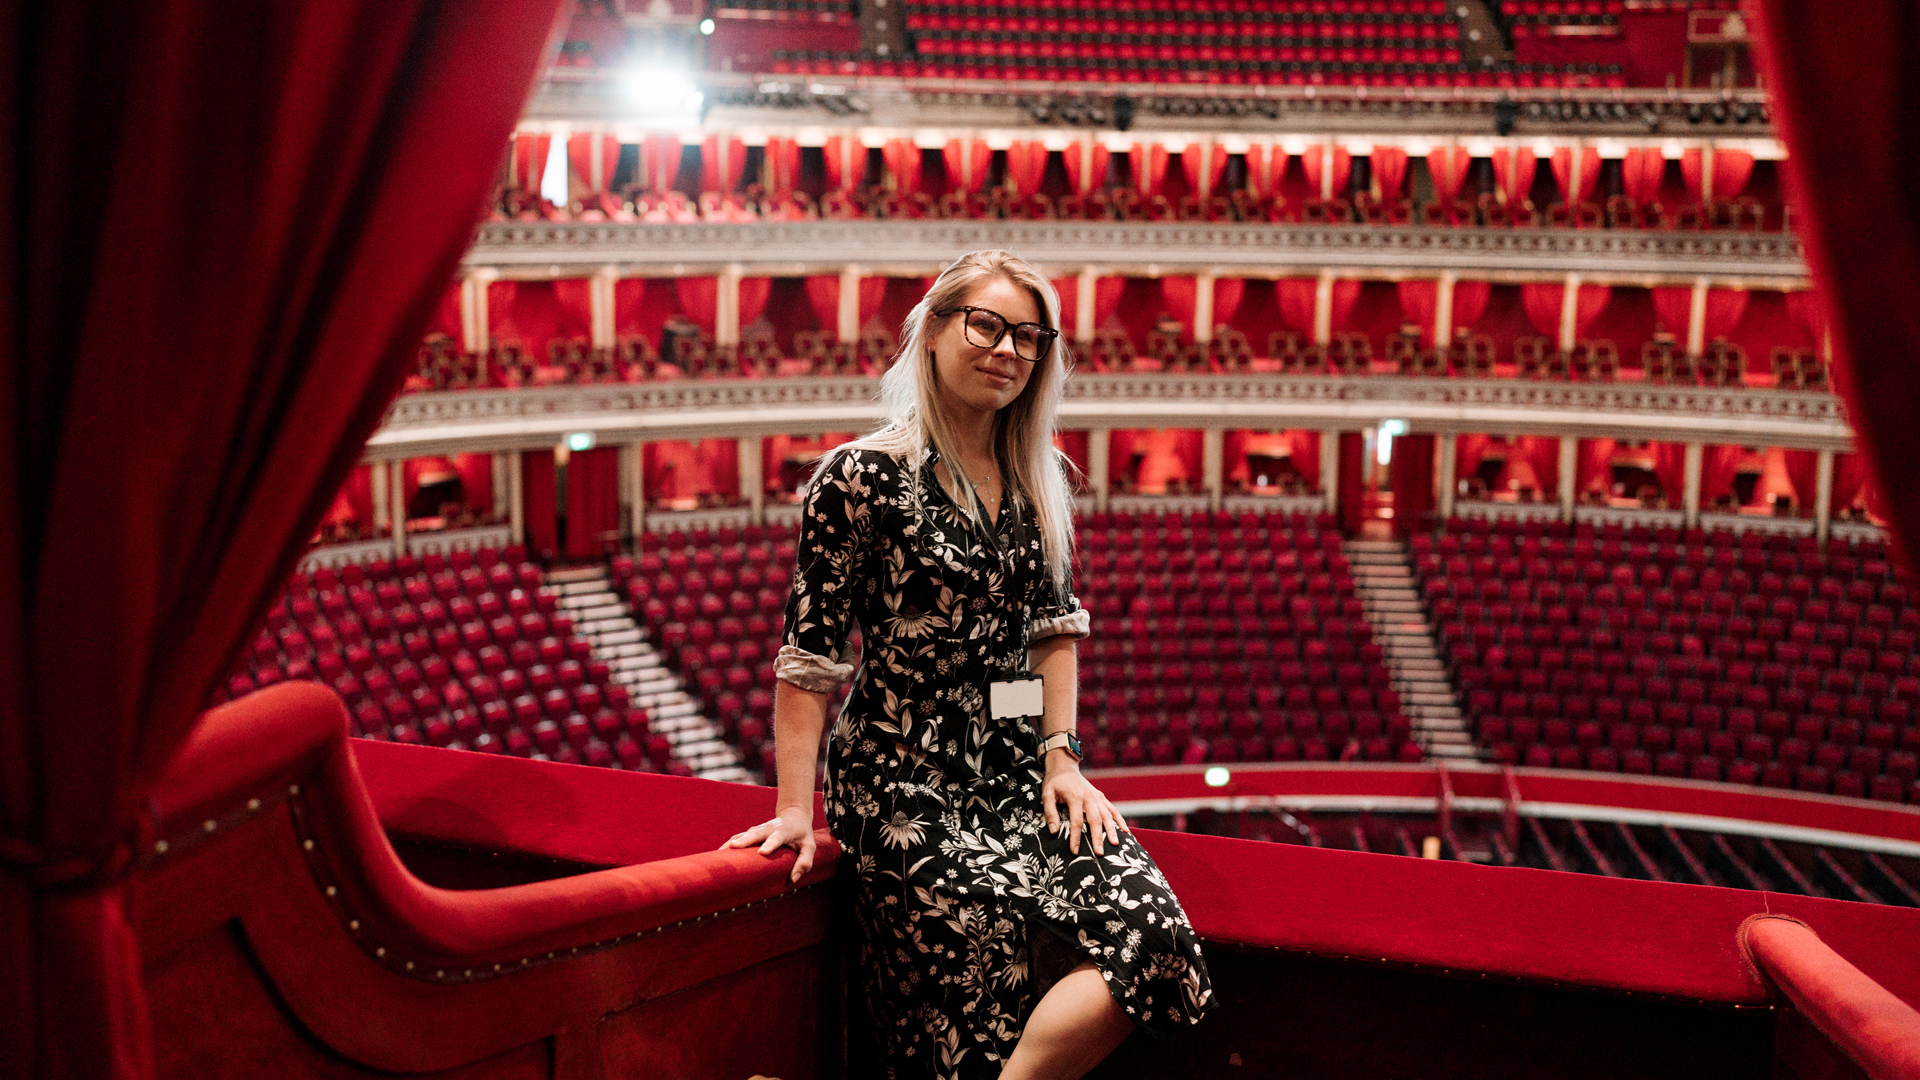 Woman sat on red ledge with backdrop of theatre seats 